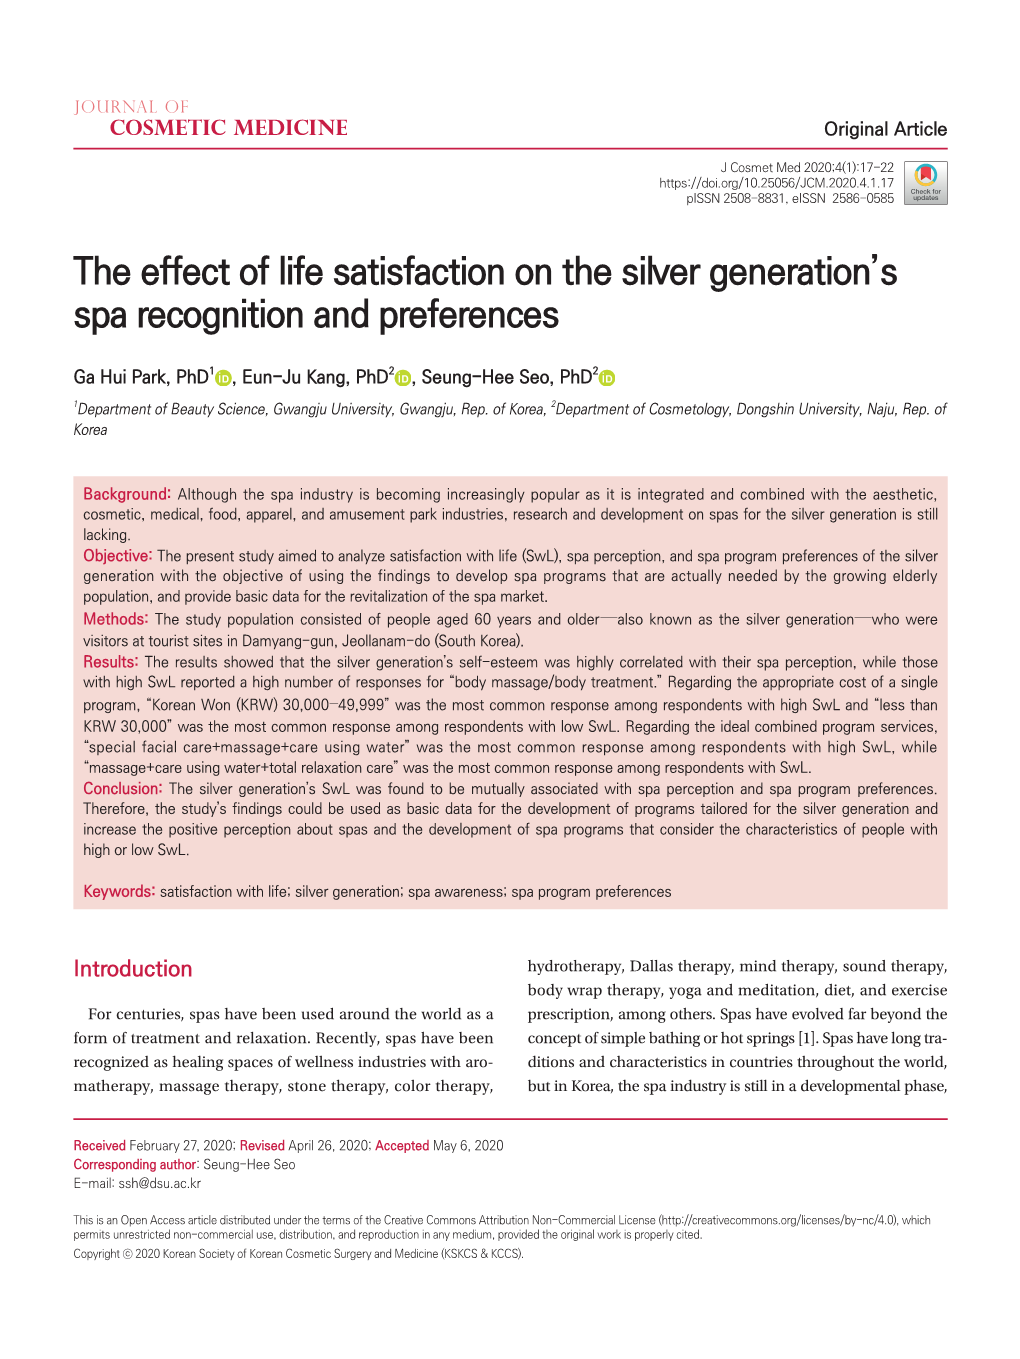 The Effect of Life Satisfaction on the Silver Generation's Spa Recognition